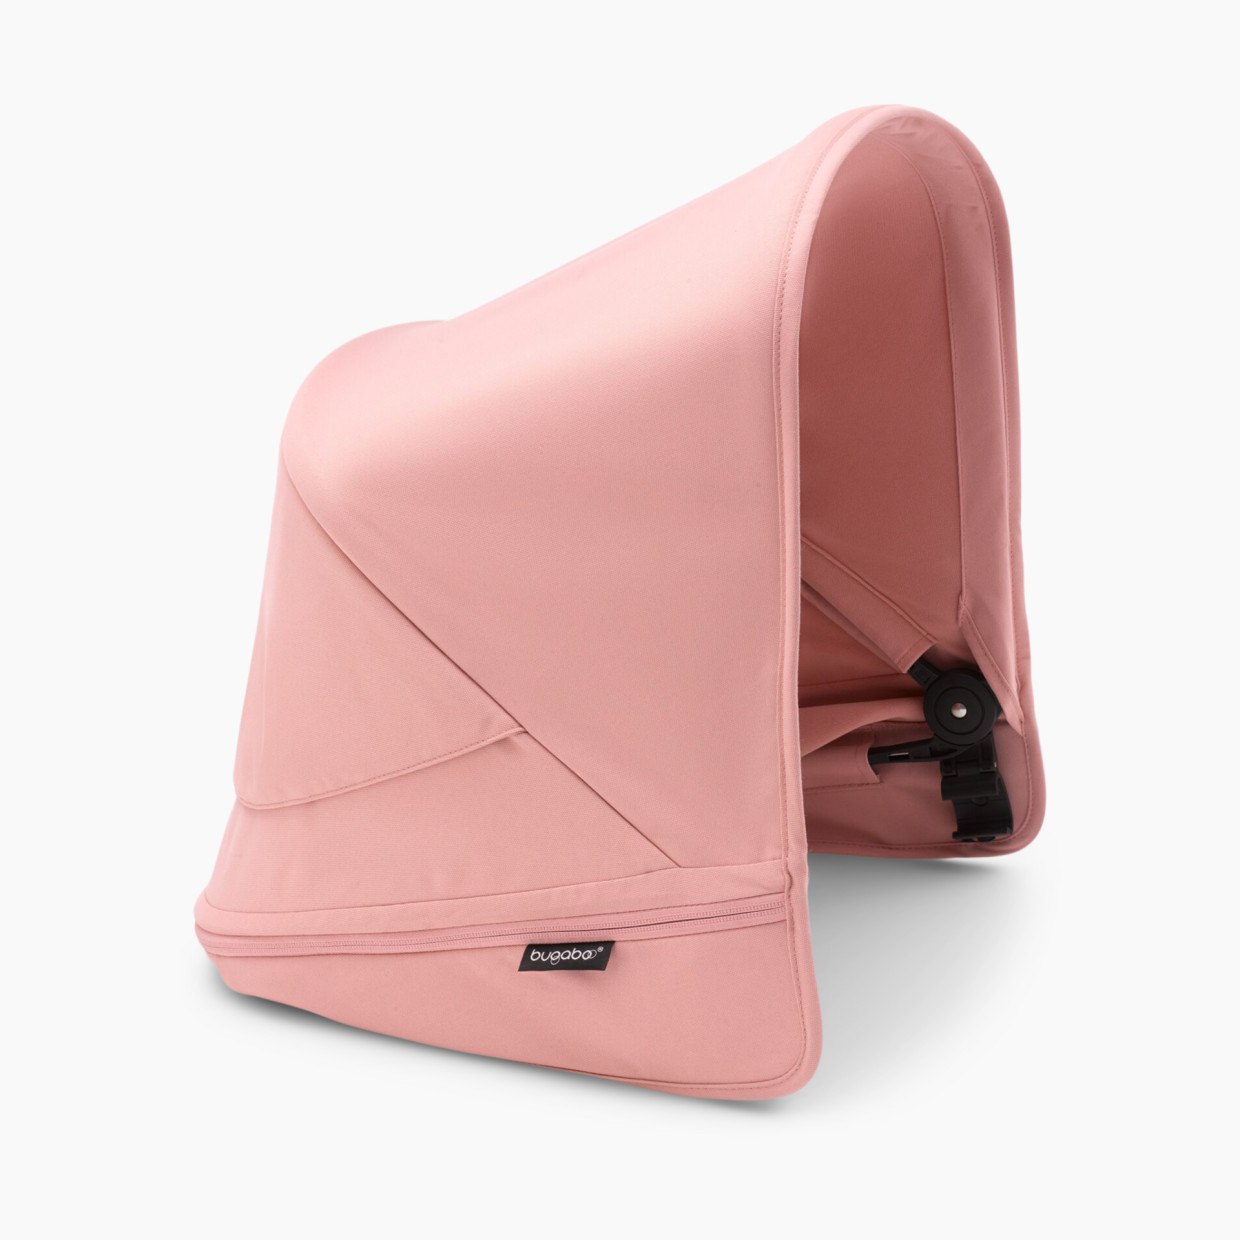 Bugaboo Donkey5 Sun Canopy - Morning Pink/Core Collection.